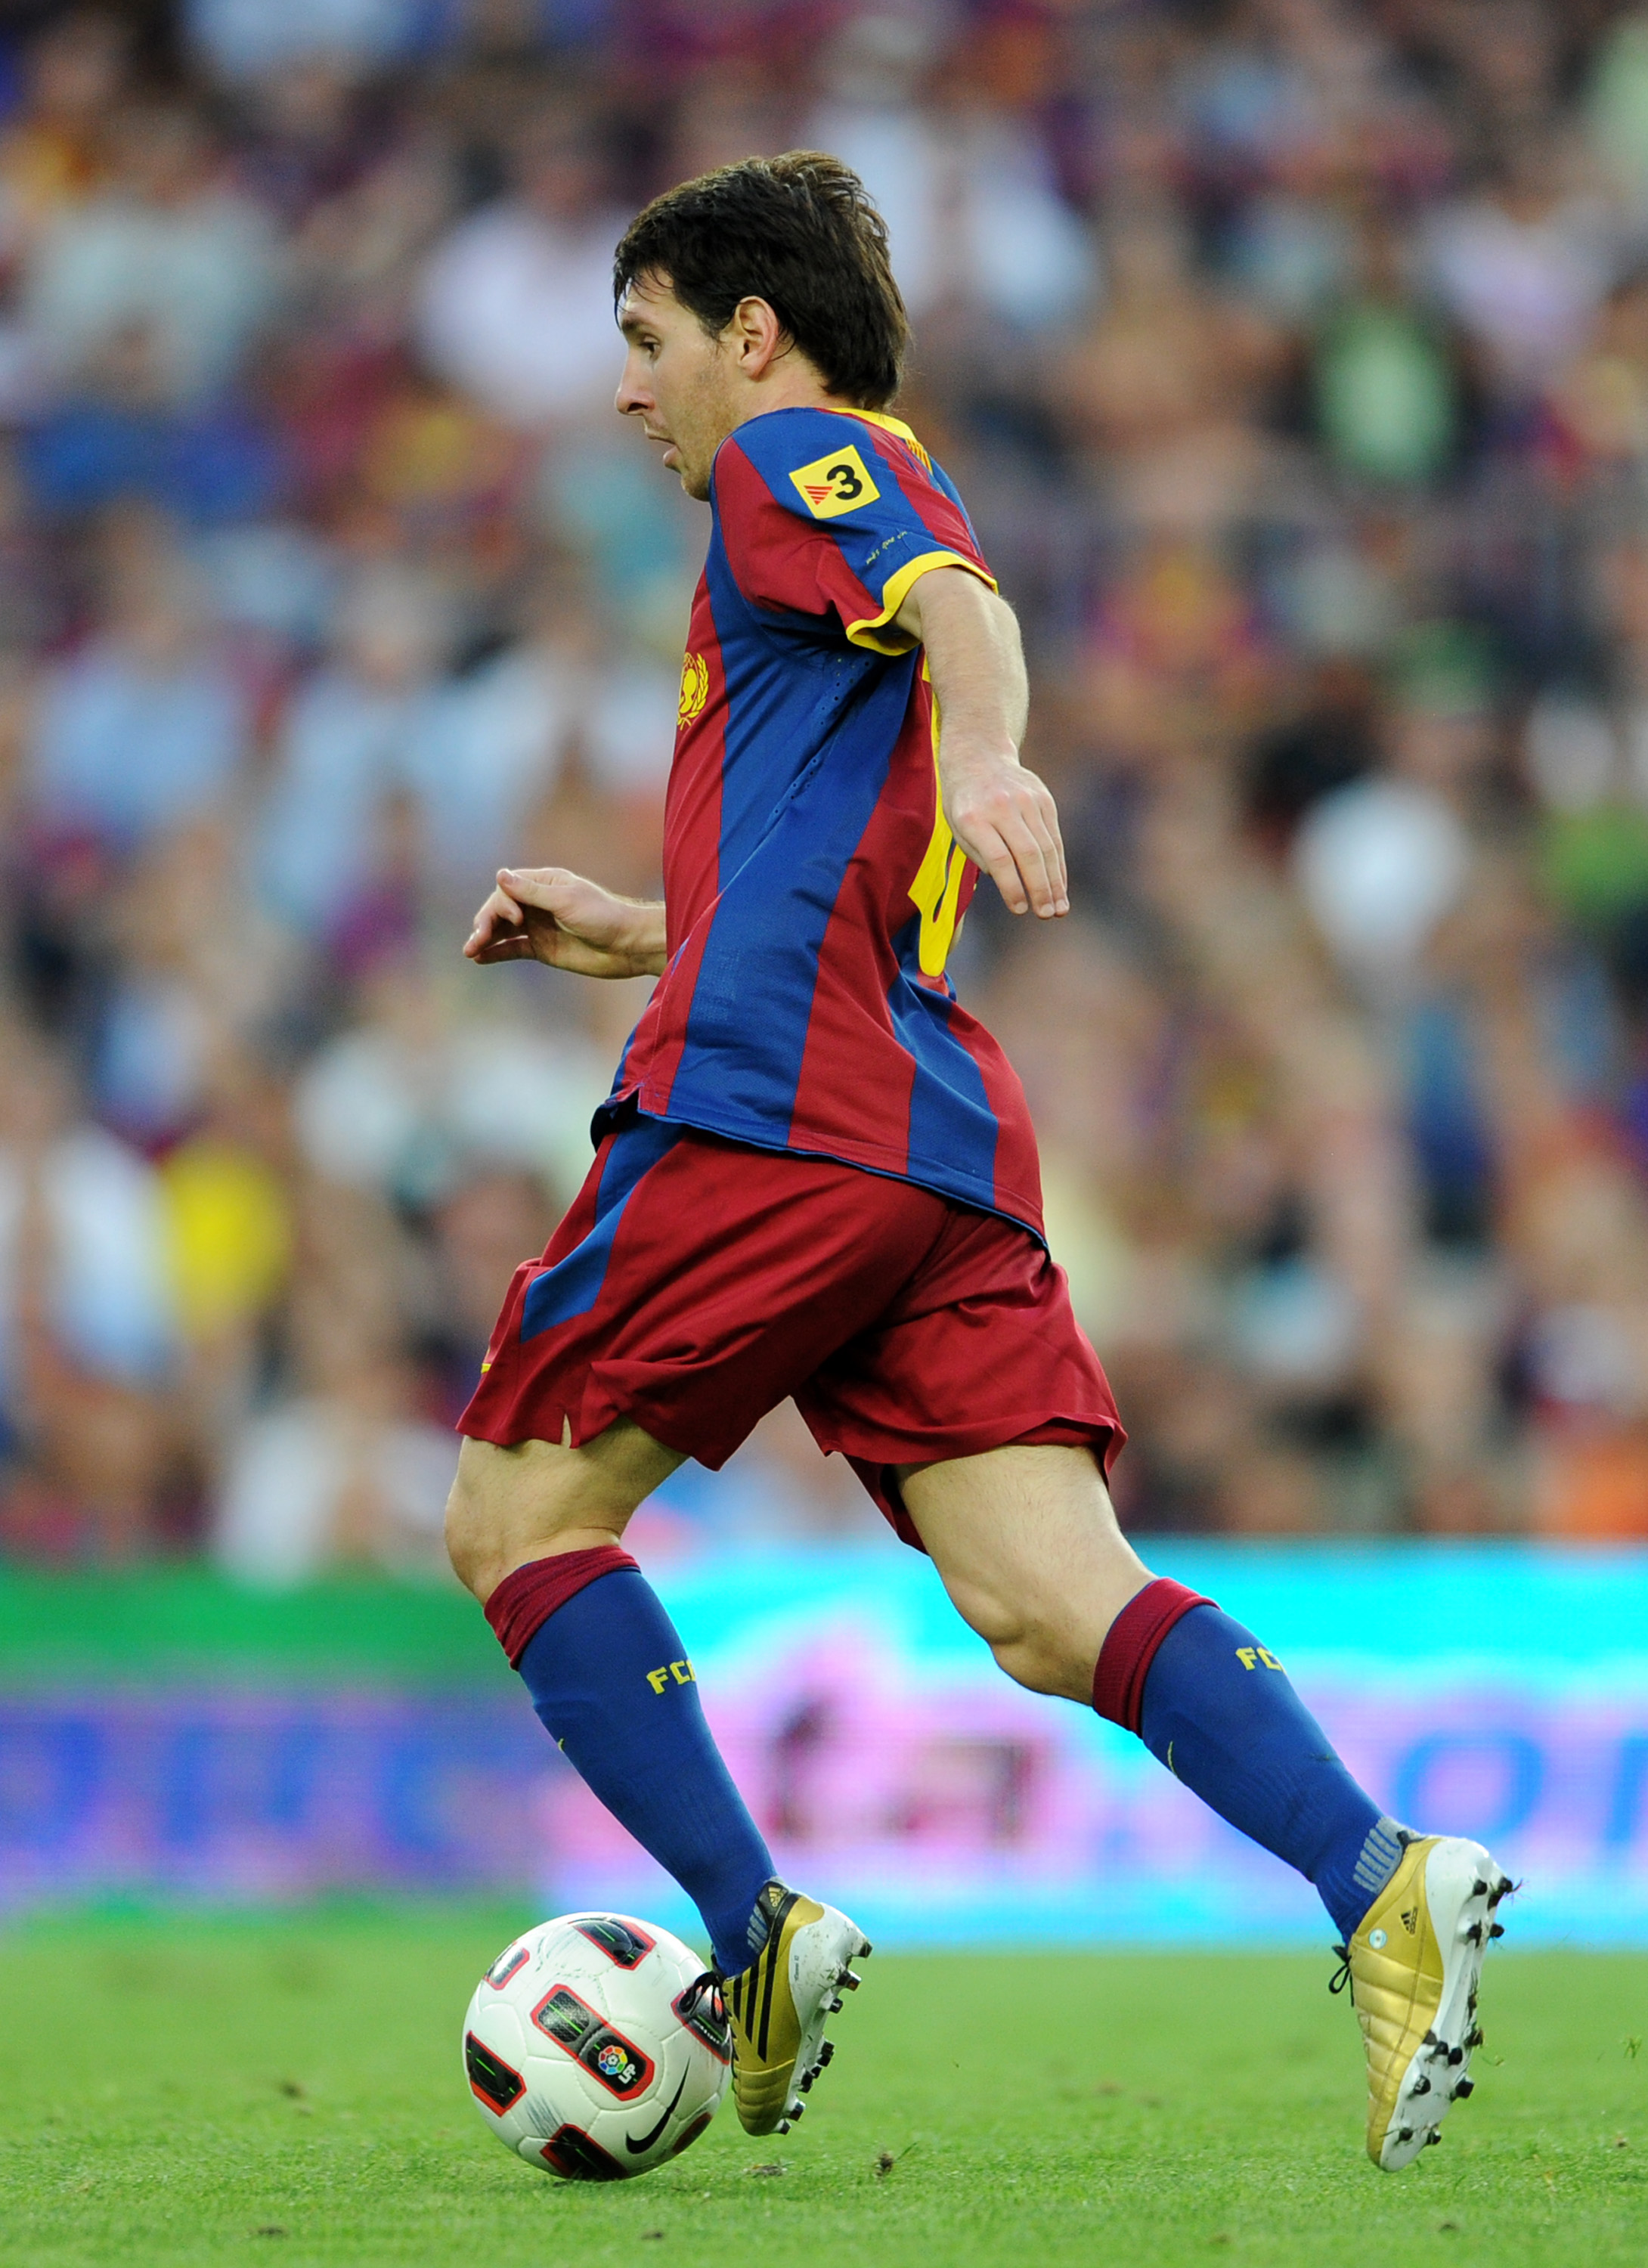 BARCELONA, SPAIN - SEPTEMBER 11:  Lionel Messi of Barcelona runs with the ball during the La Liga match between Barcelona and Hercules at the Camp Nou stadium on September 11, 2010 in Barcelona, Spain. Barcelona lost the match 2-0.  (Photo by Jasper Juine